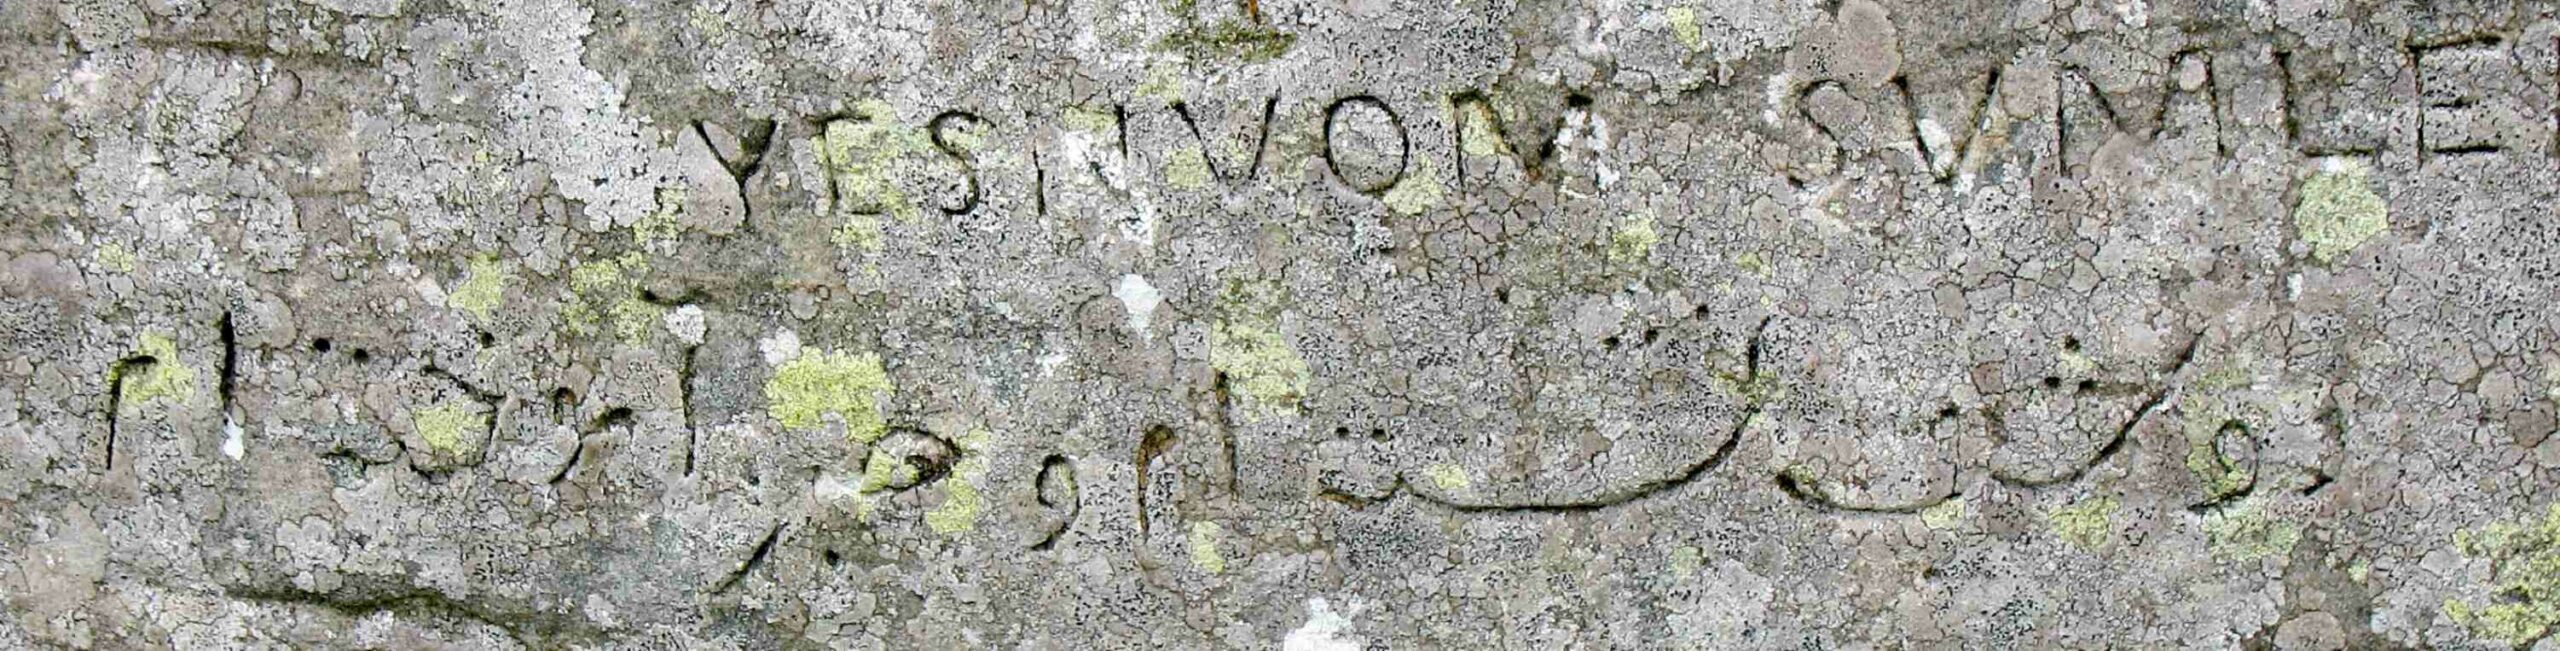 This is an inscription in Persian calligraphy on the Dwarfie Stane. It was left by captain William Henry Mounsey of Castletown and Rockcliffe, who camped here in 1850, and reads: "I have sat two nights and so learnt patience". Above the Persian is his name written backwards in Latin.